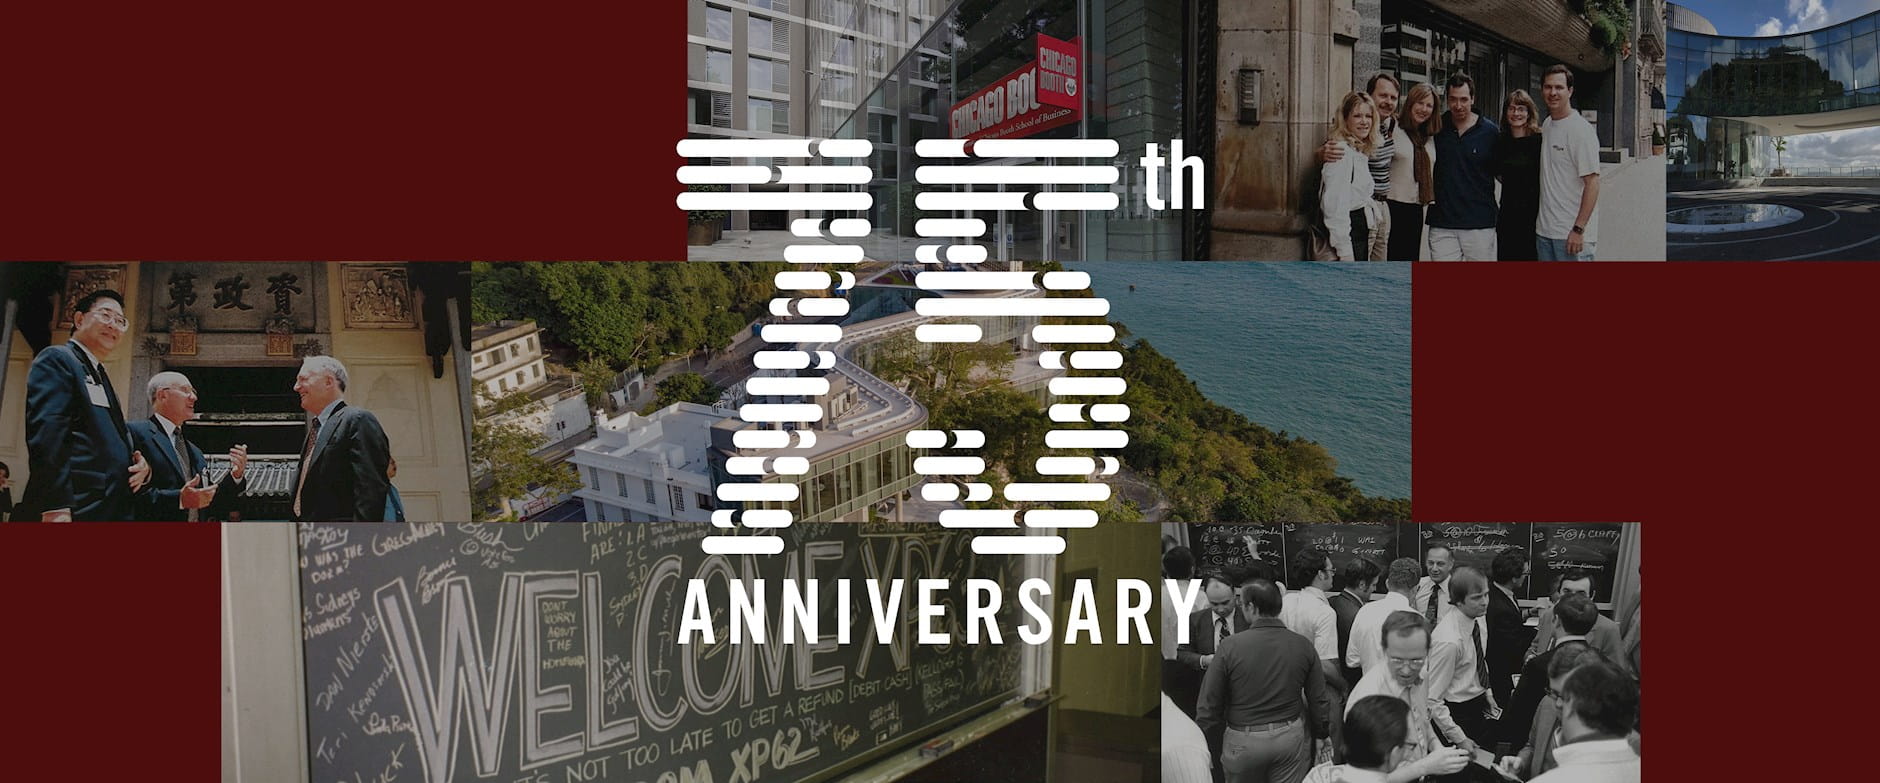 Collage of images celebrating the 75th anniversary of EMBA at Chicago Booth